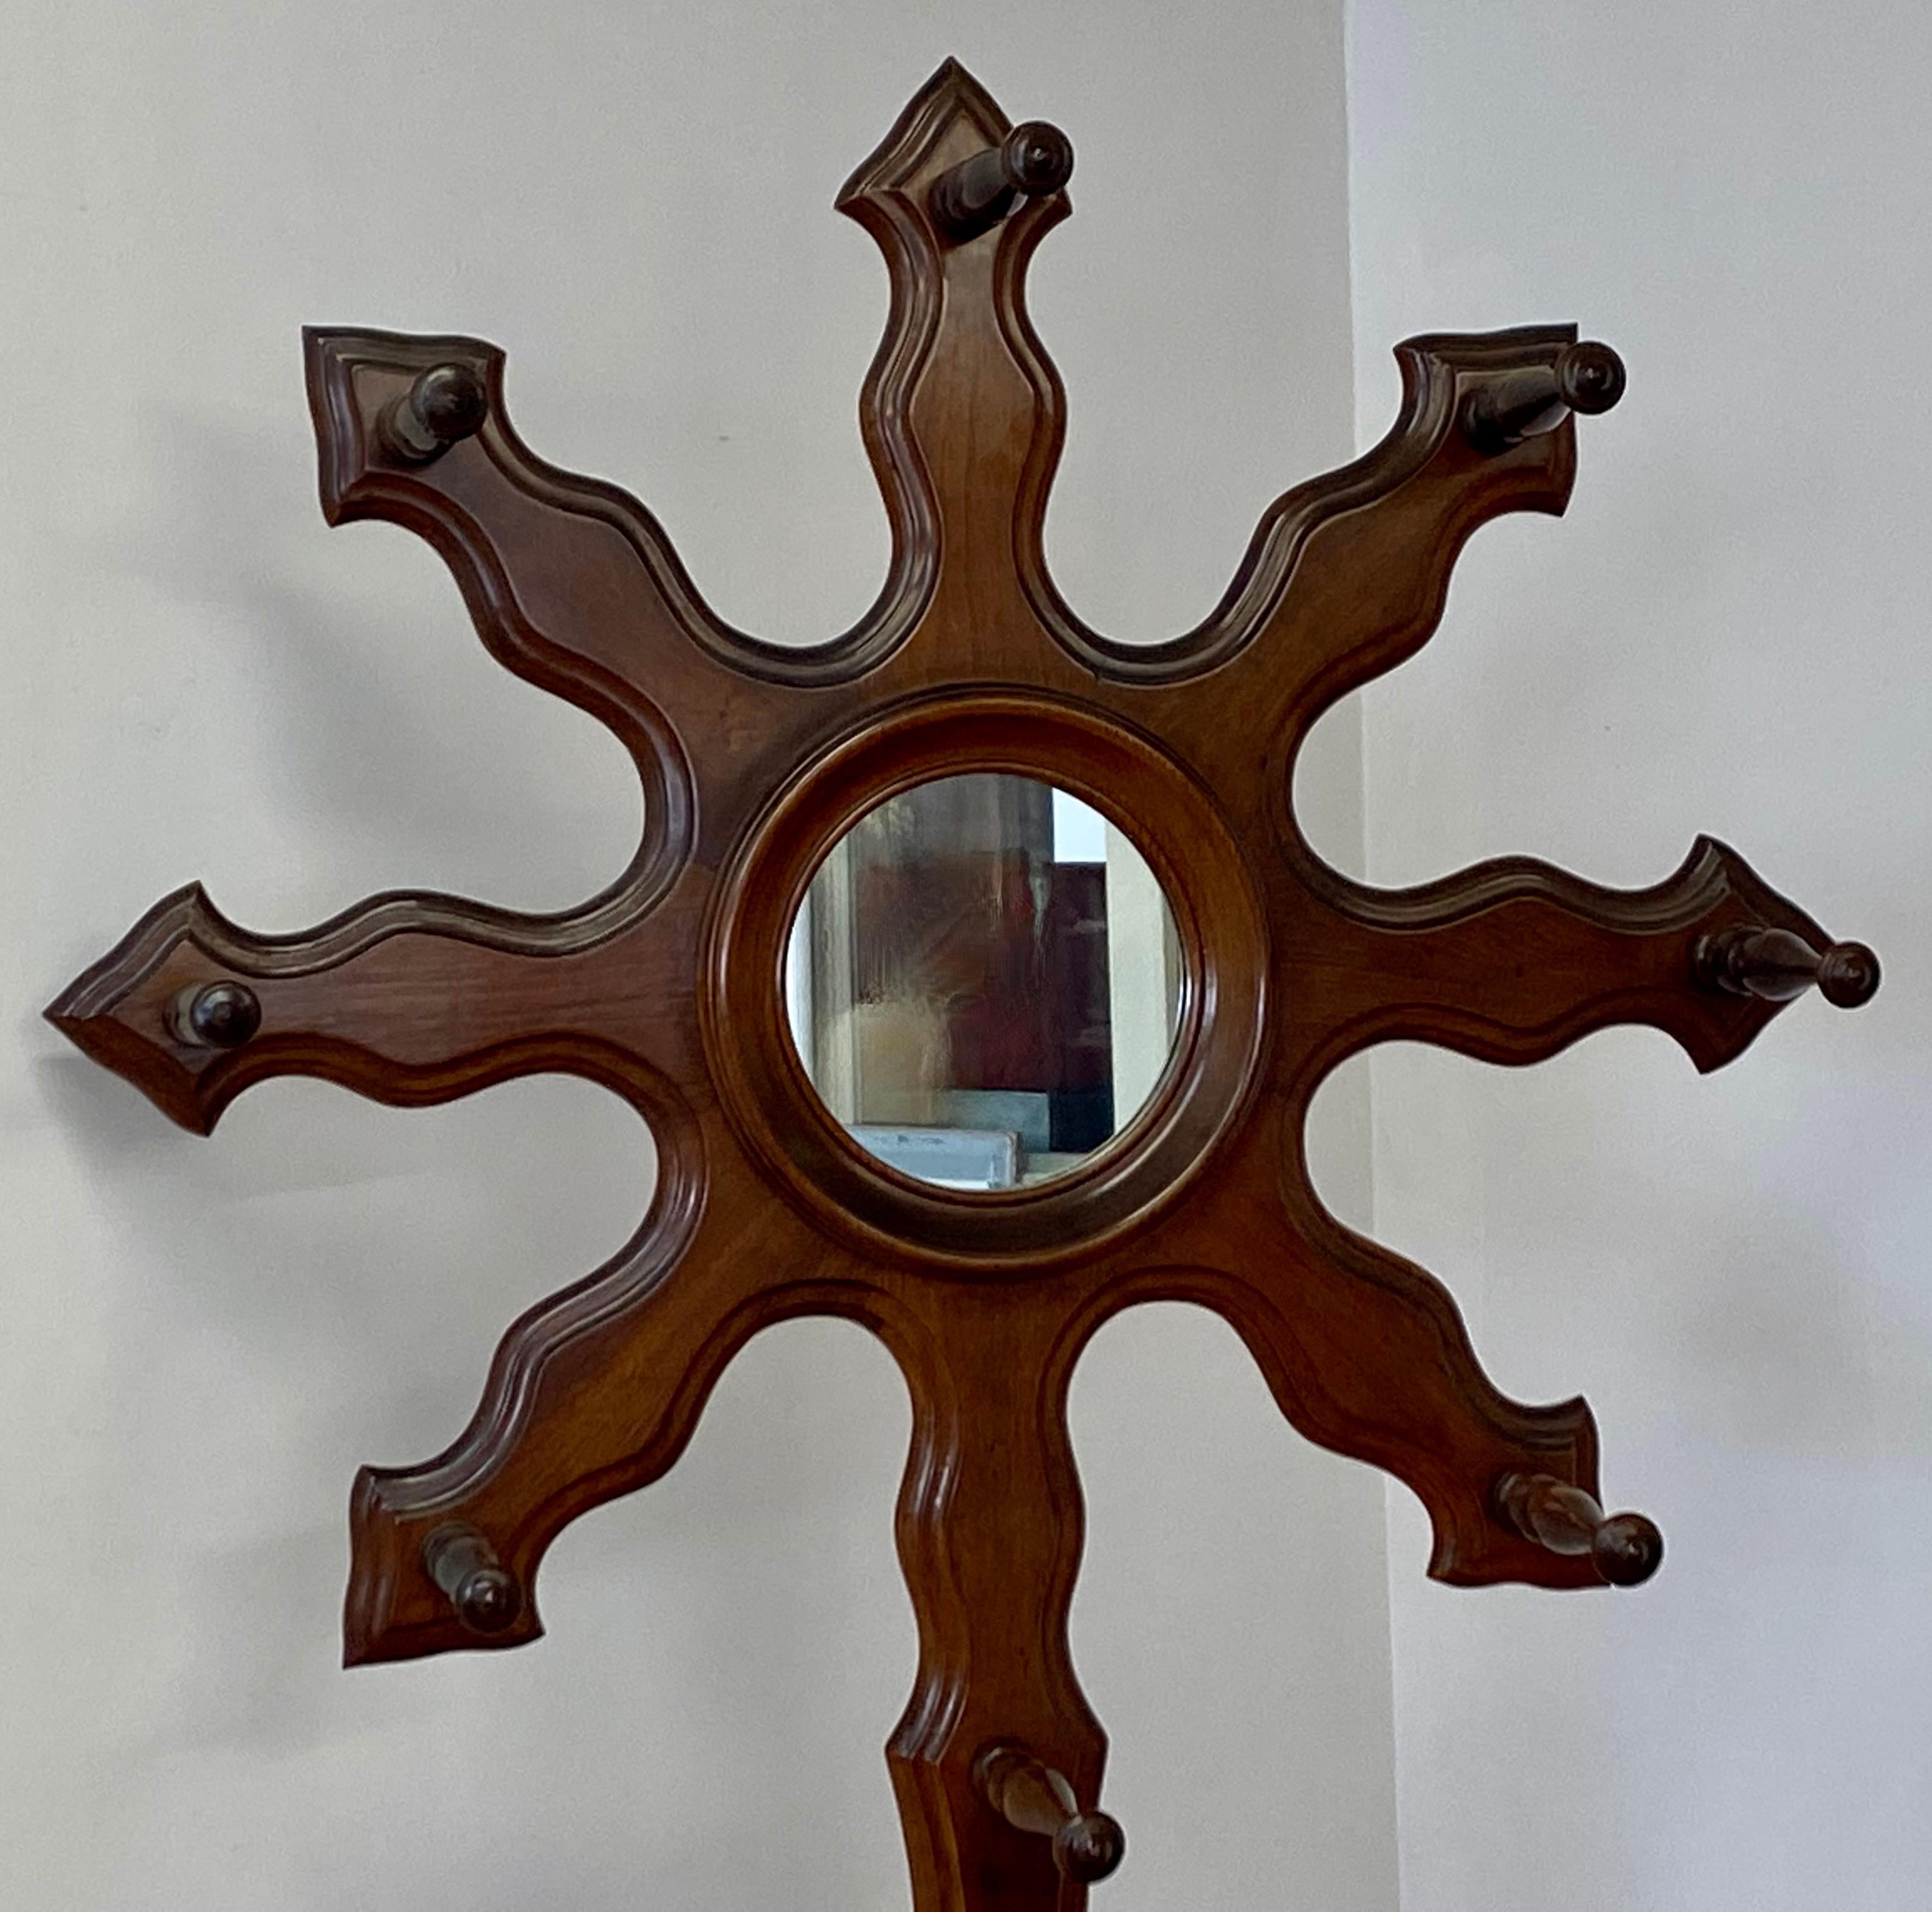 Arts & Crafts walnut sunburst hall tree

Free standing hall tree with eight coat hooks and umbrella stand

The center of the sunburst is a mirror 

Measures: 24